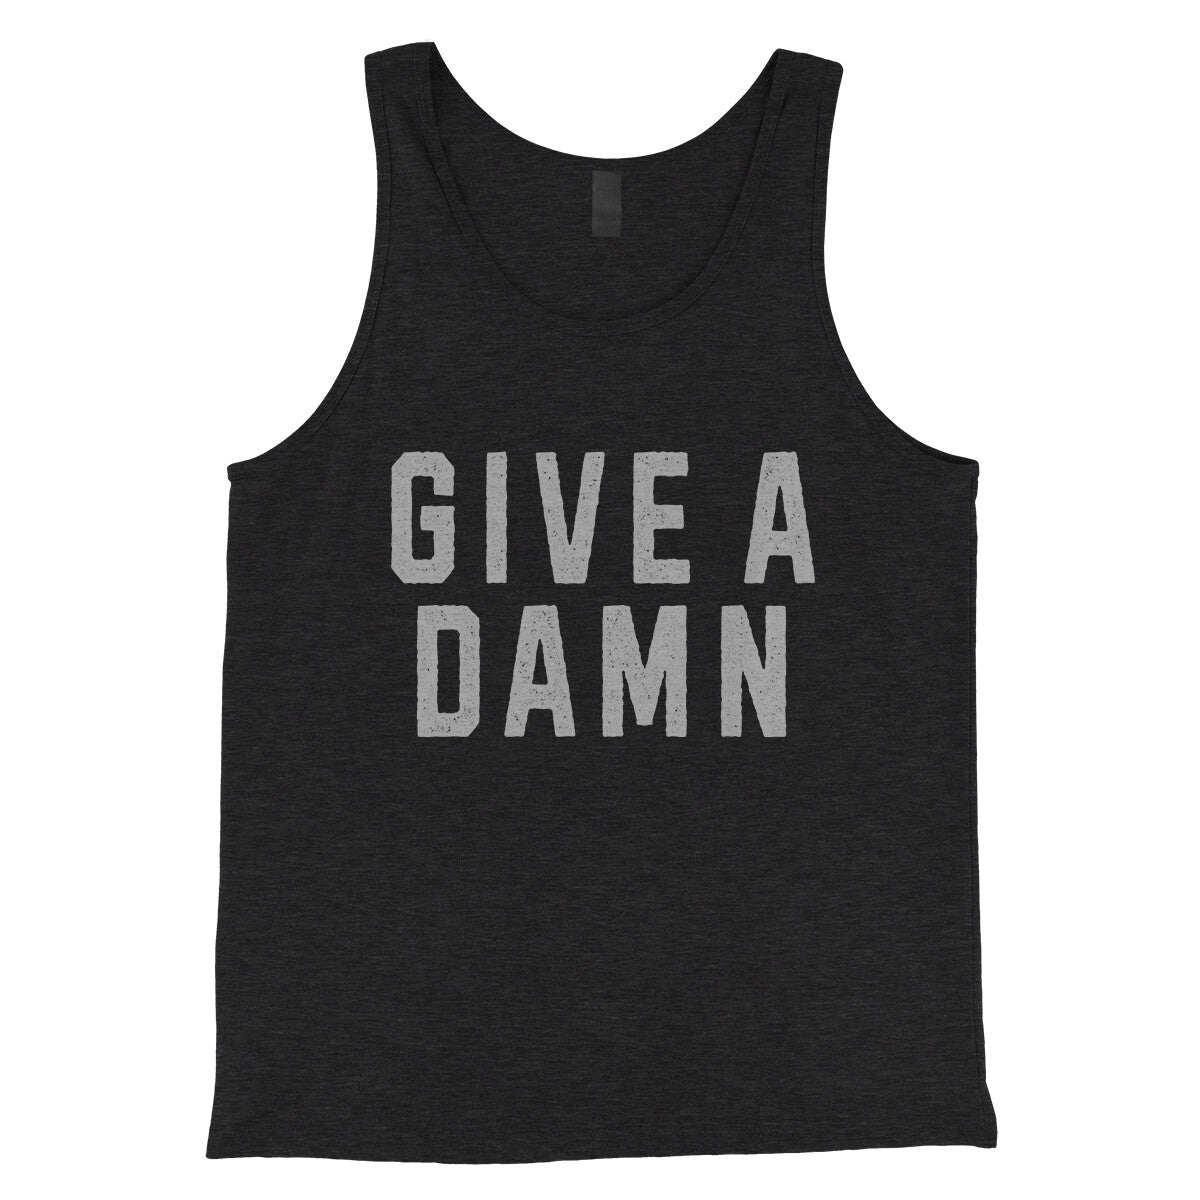 Give a Damn in Charcoal Black TriBlend Color